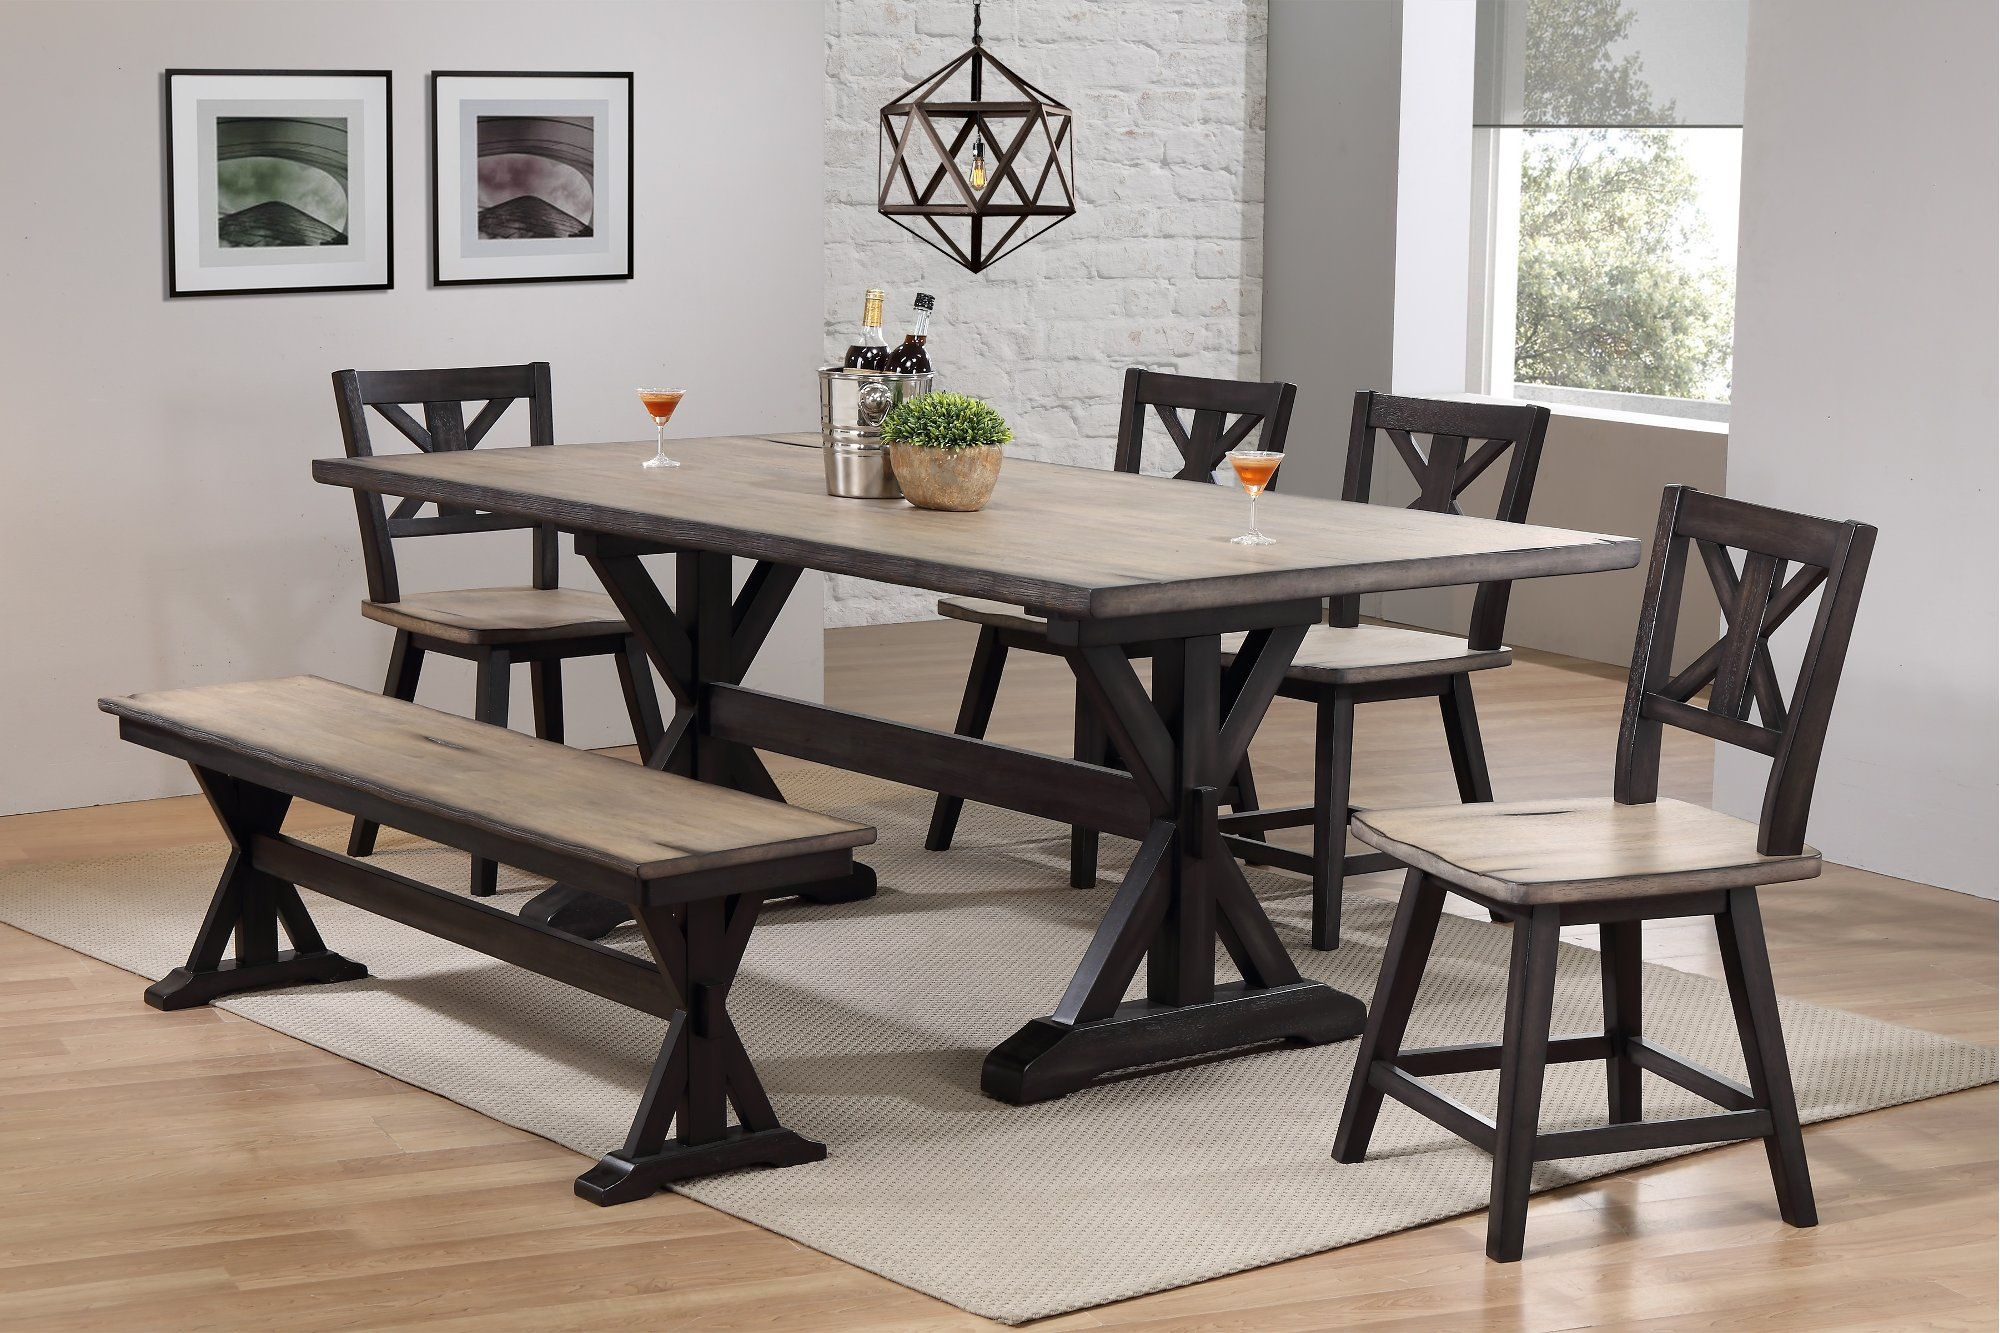 Farmhouse Sand And Black 6 Piece Dining Set With Bench with dimensions 2000 X 1333